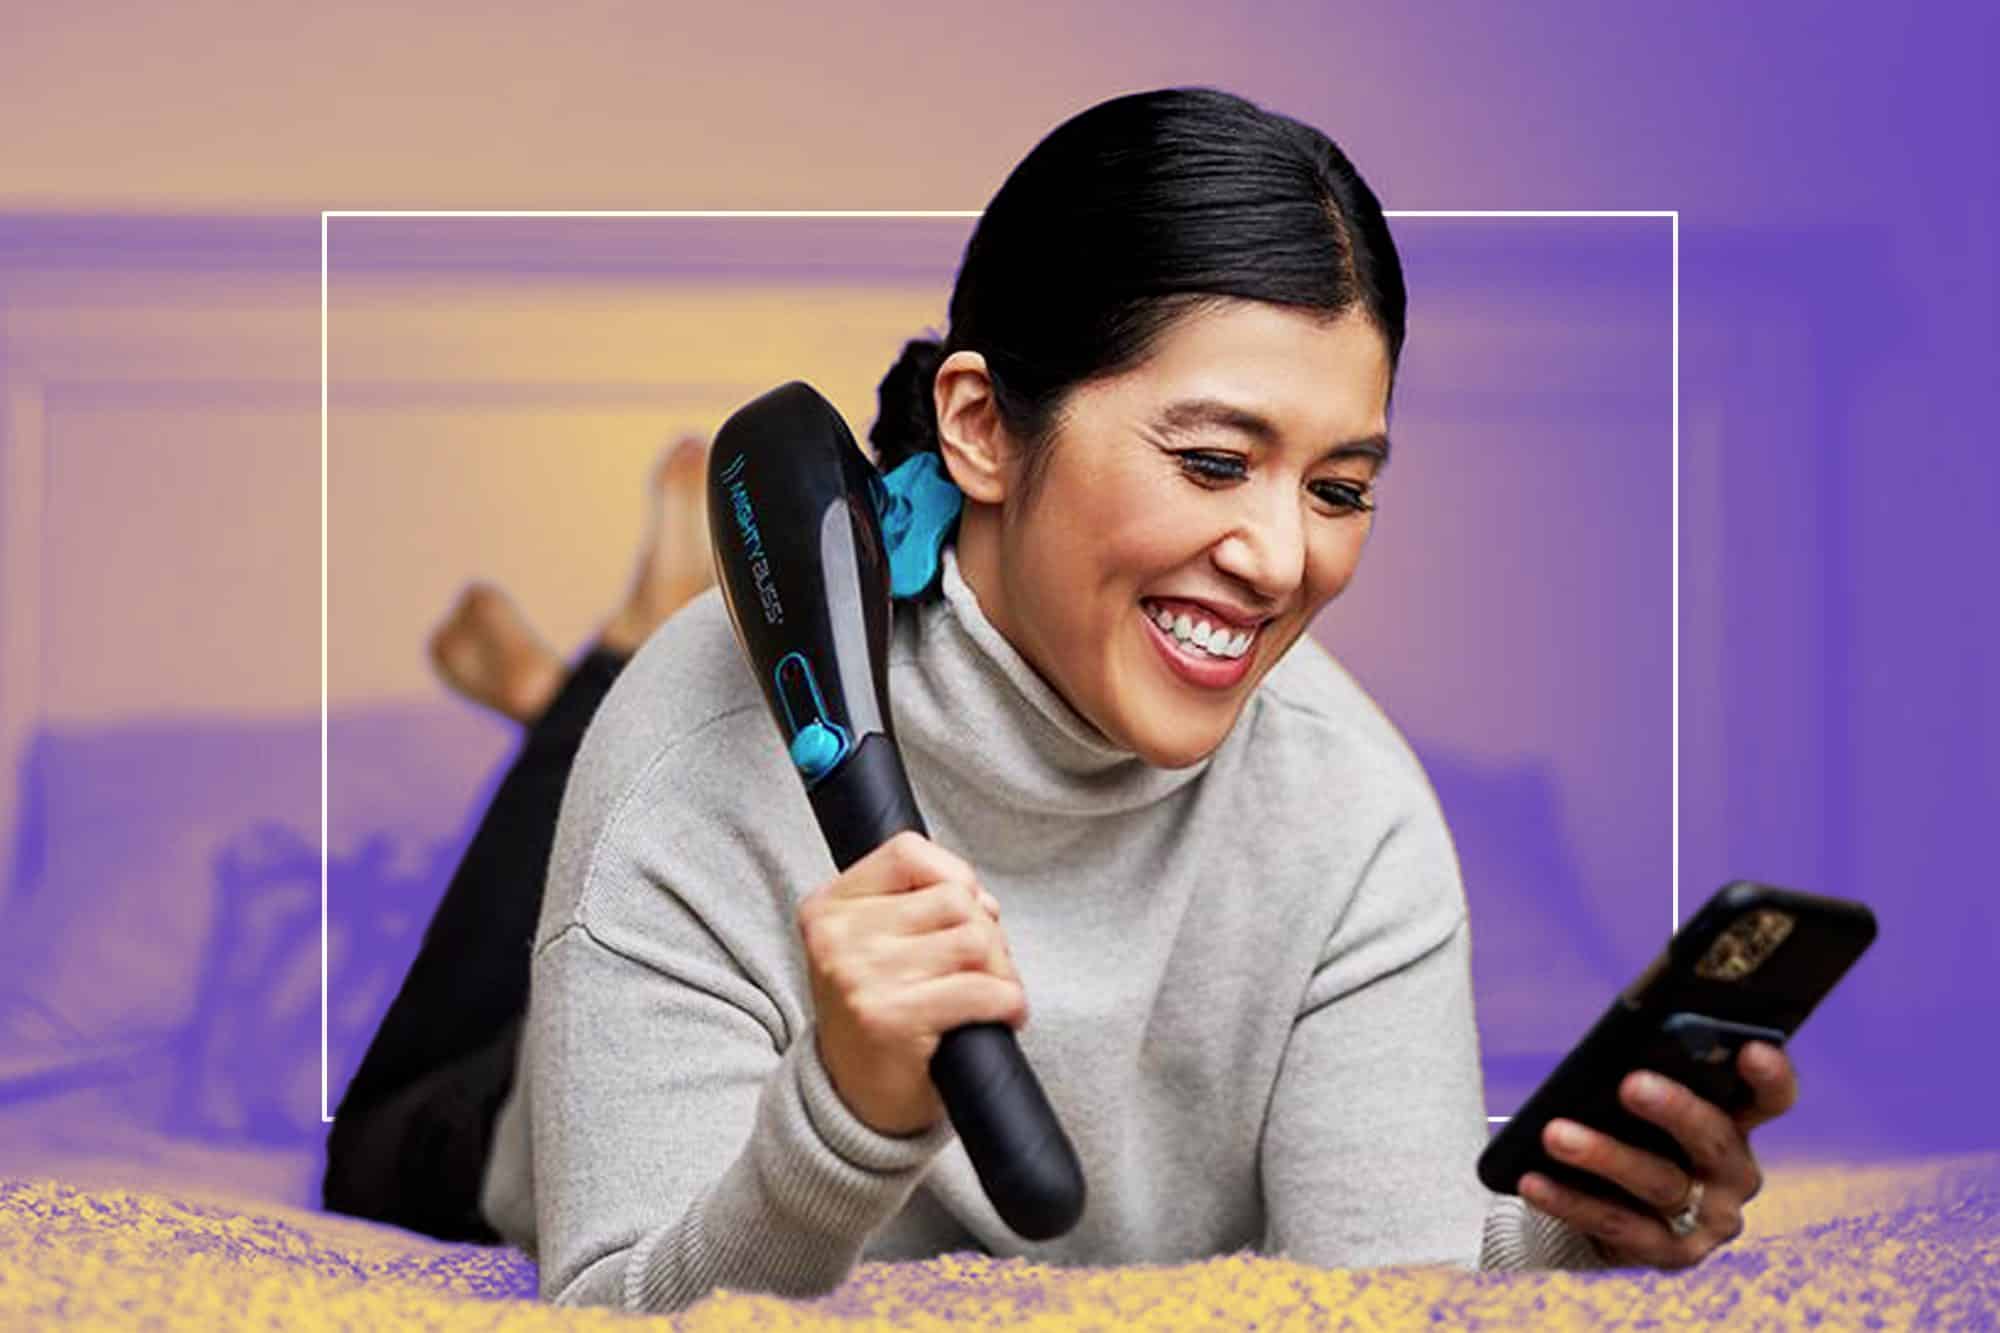 Mighty Bliss Cordless Massager review